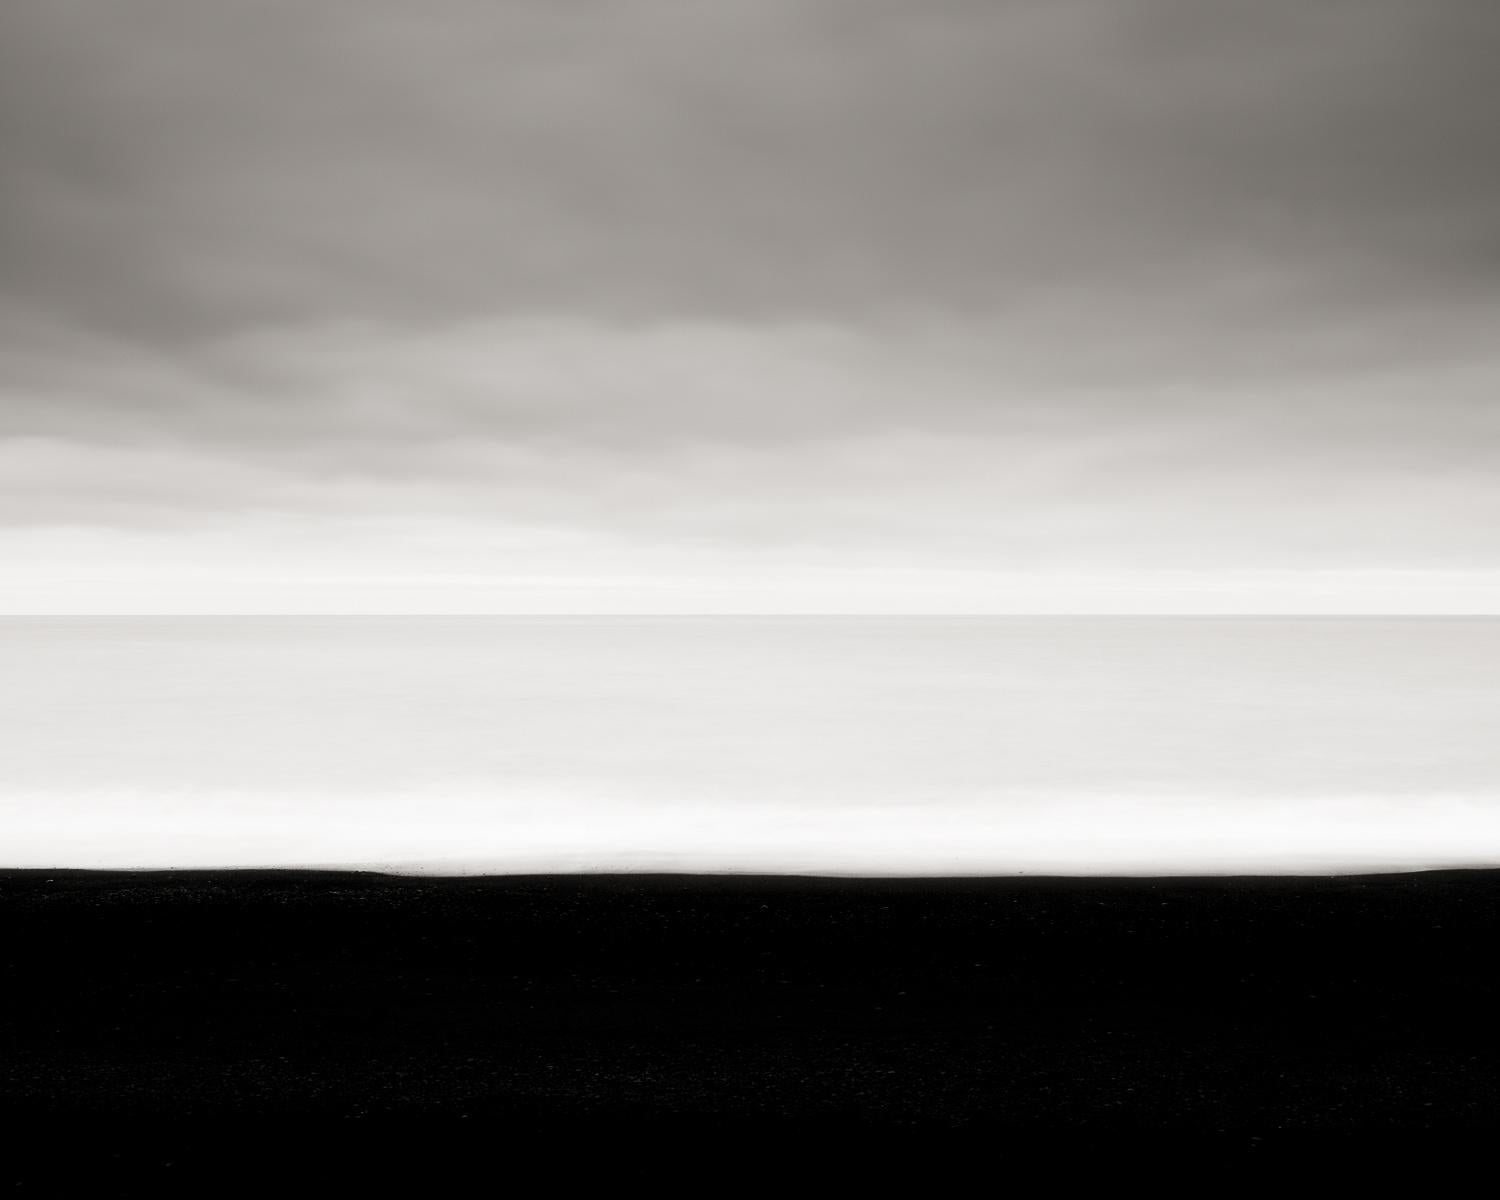 Jeffrey Conley Black and White Photograph - Midnight Sun and Black Sand Beach, Iceland, 2017 (Printed 2023)